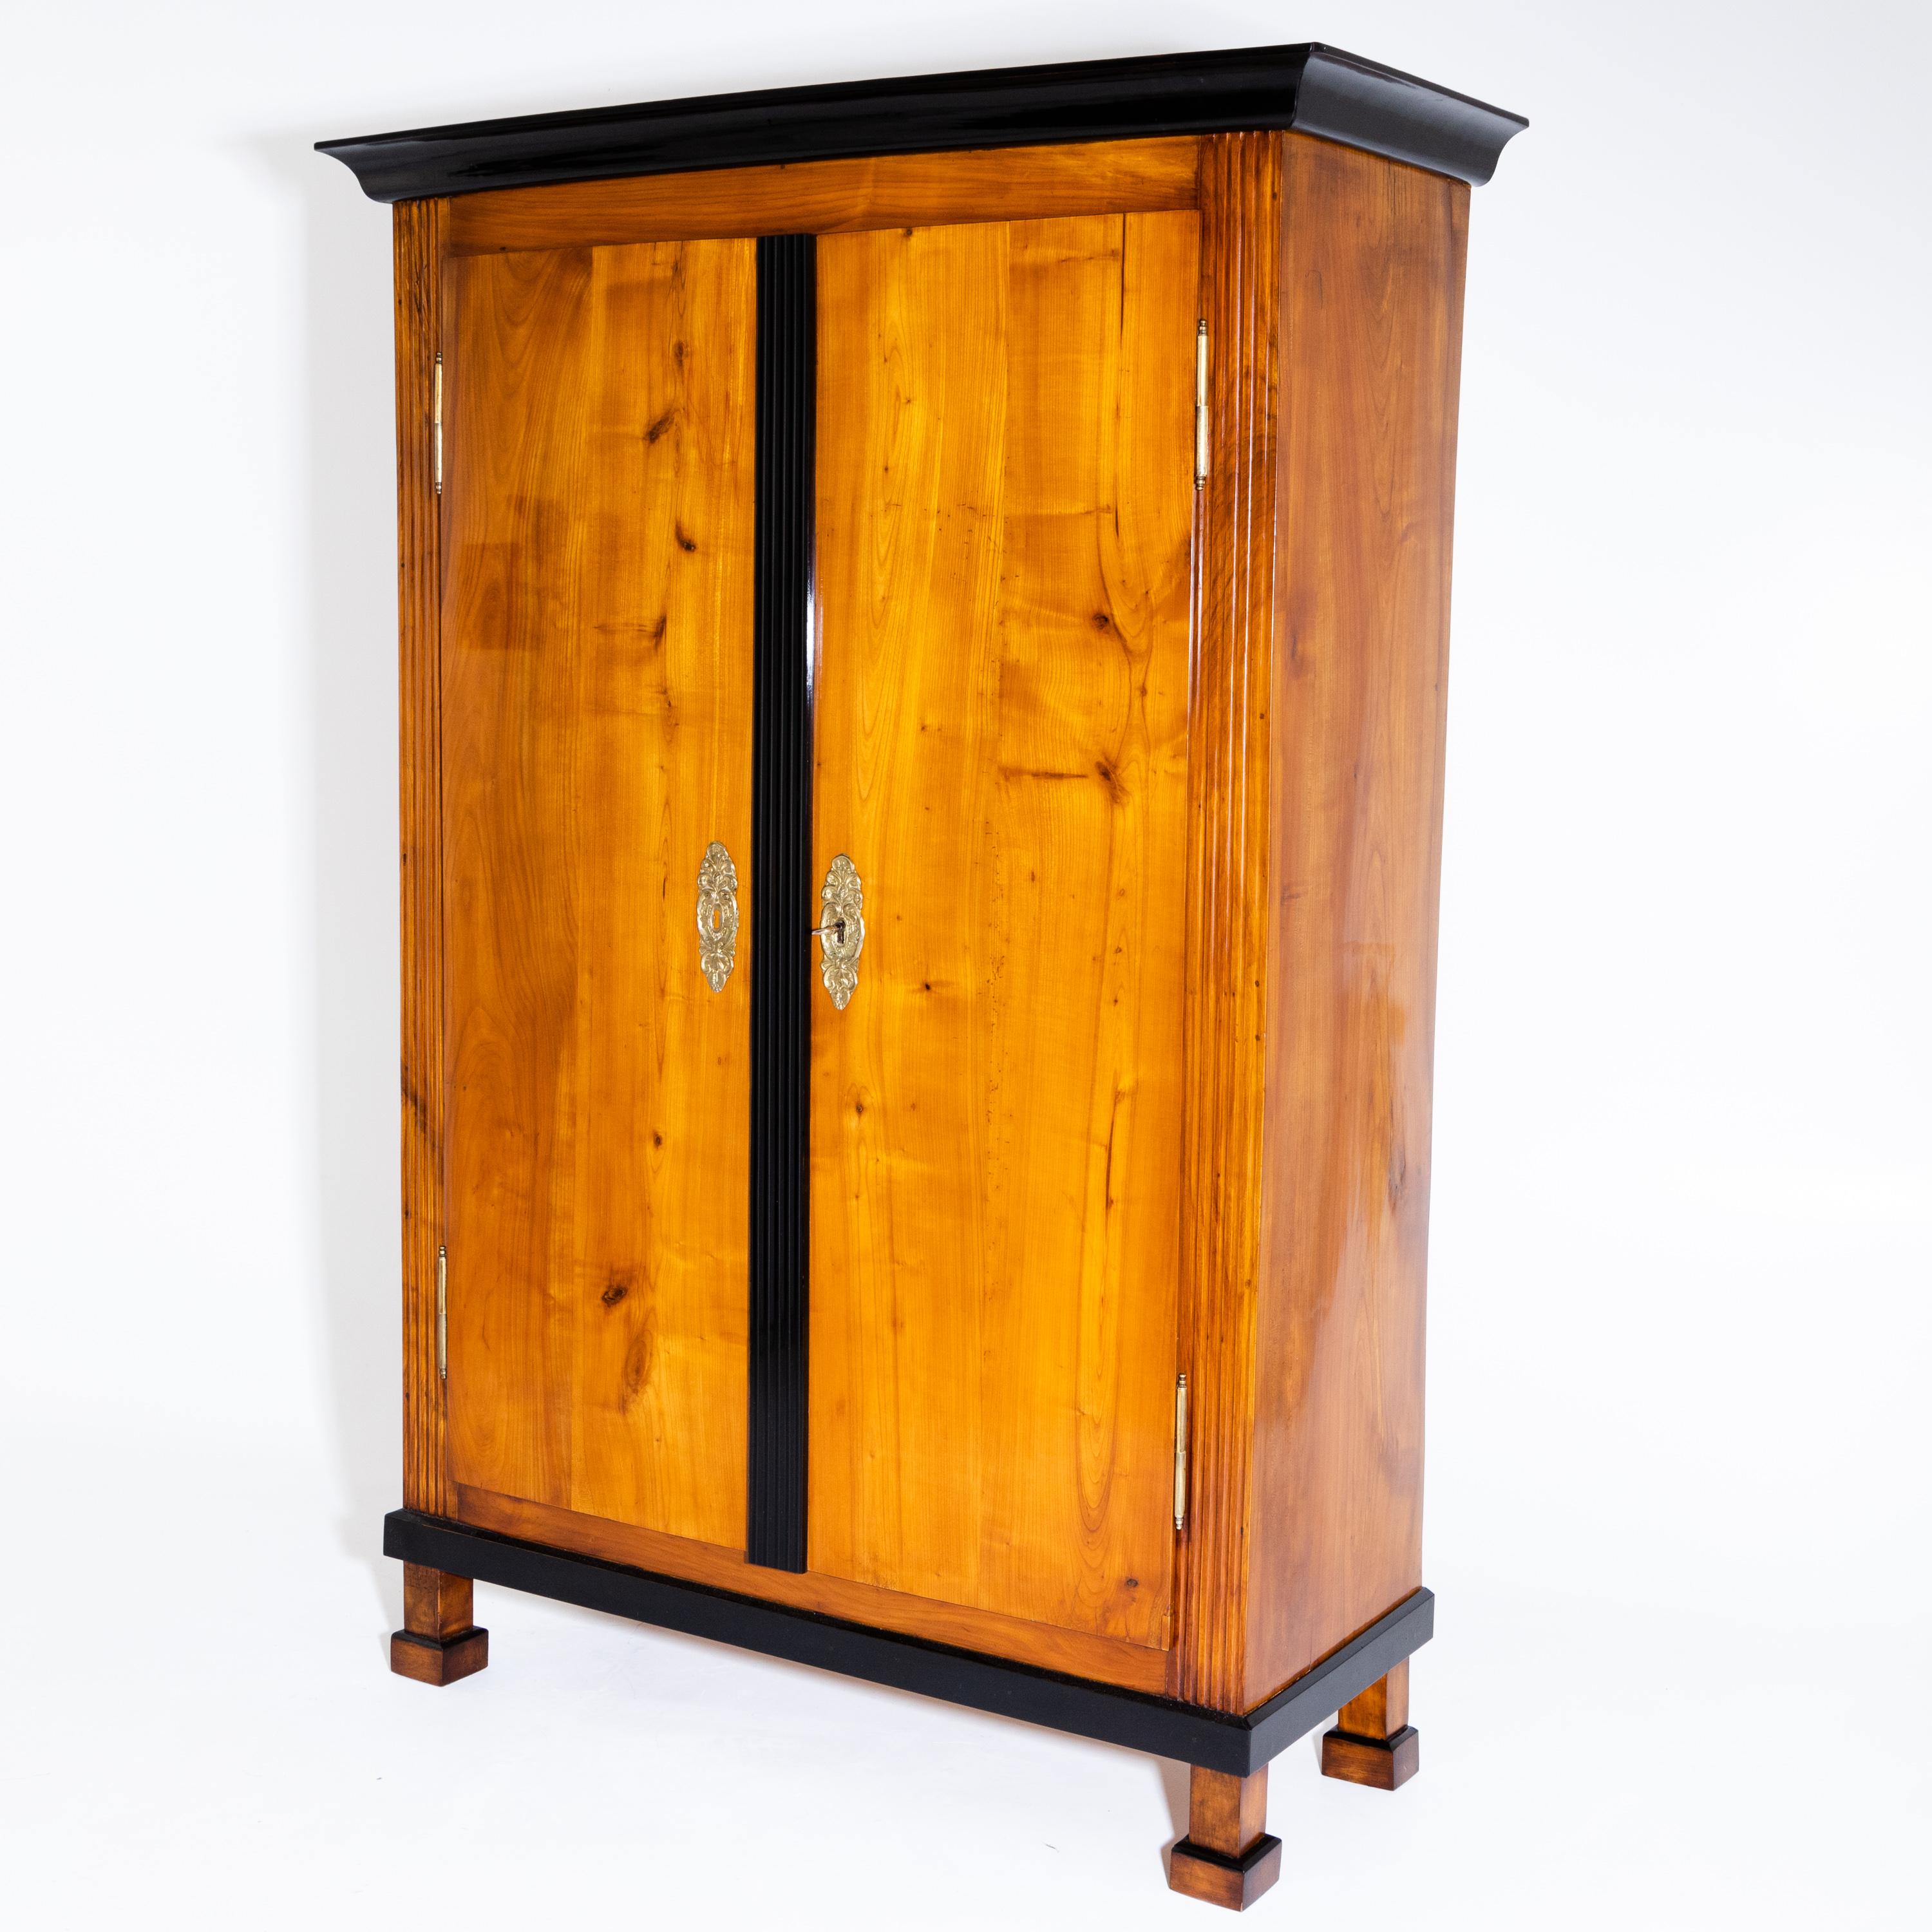 A two-door Biedermeier cabinet with an ebonized, fluted rail and fluted corners. The profiled cornice and the plinth area are also ebonized. The cabinet has been professionally restored and hand polished.